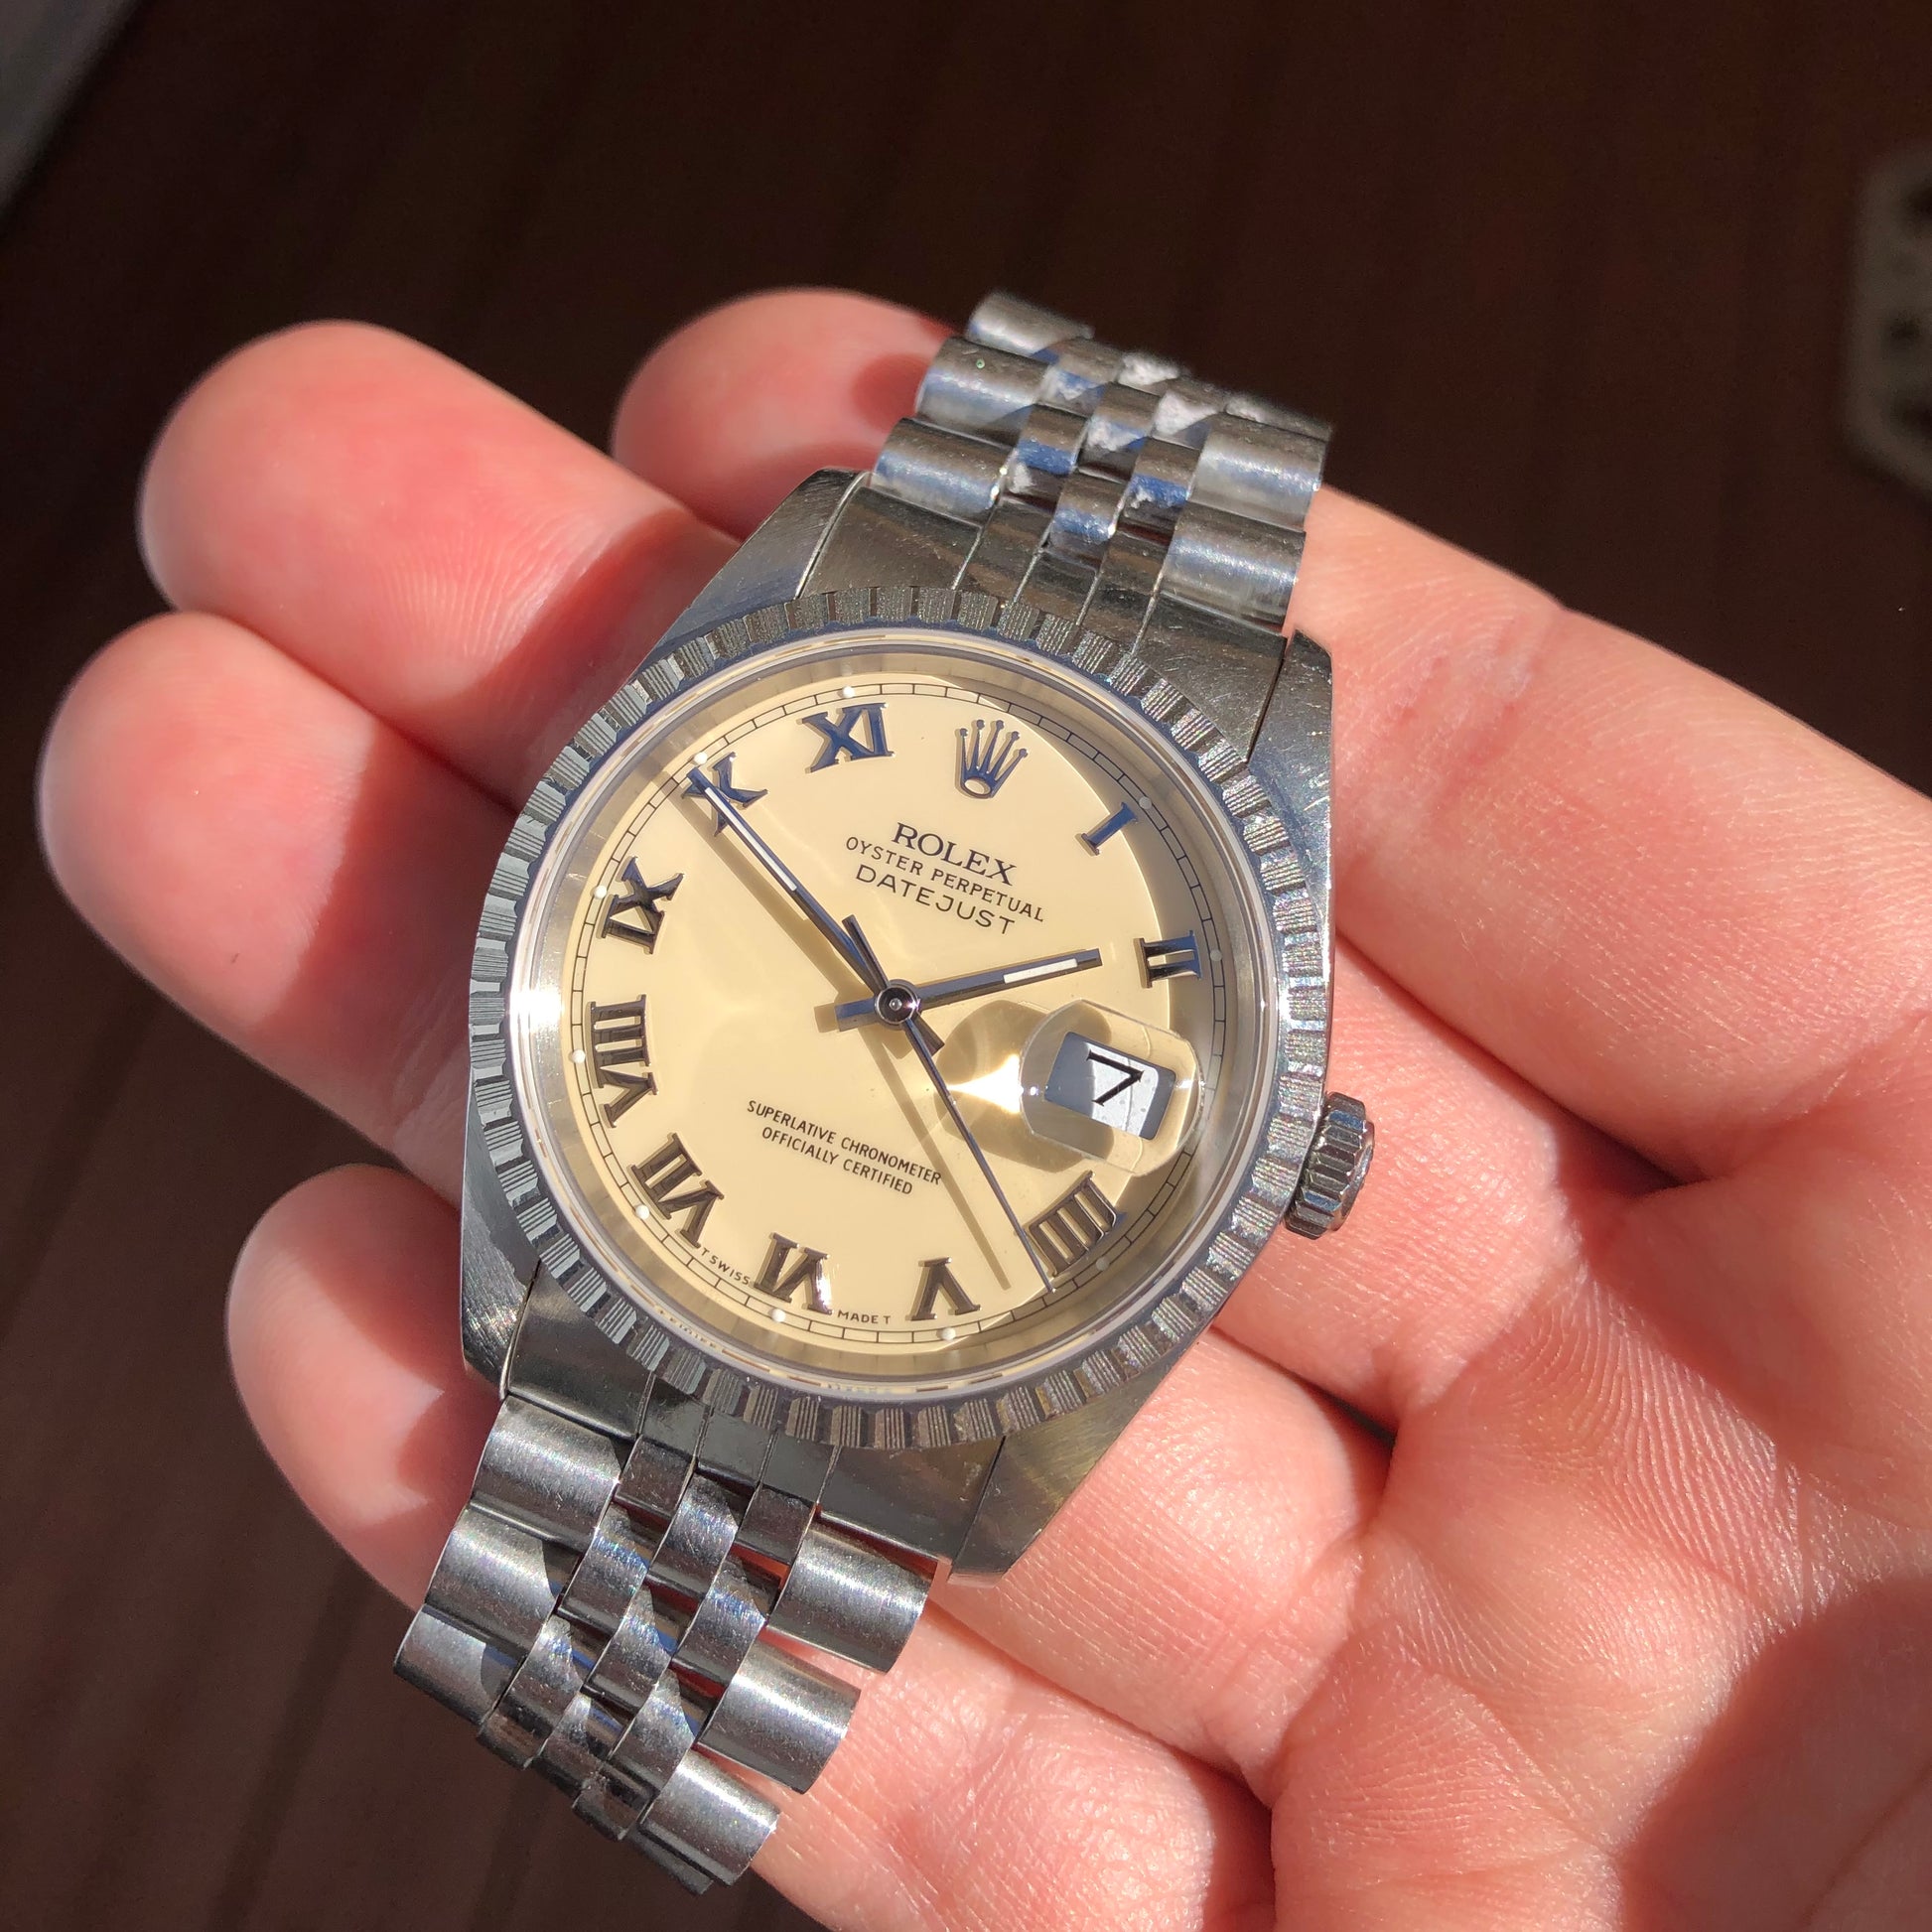 1989 Vintage Rolex Datejust 16220 Cream Jubilee Steel Engine Turned Automatic Wristwatch - Hashtag Watch Company